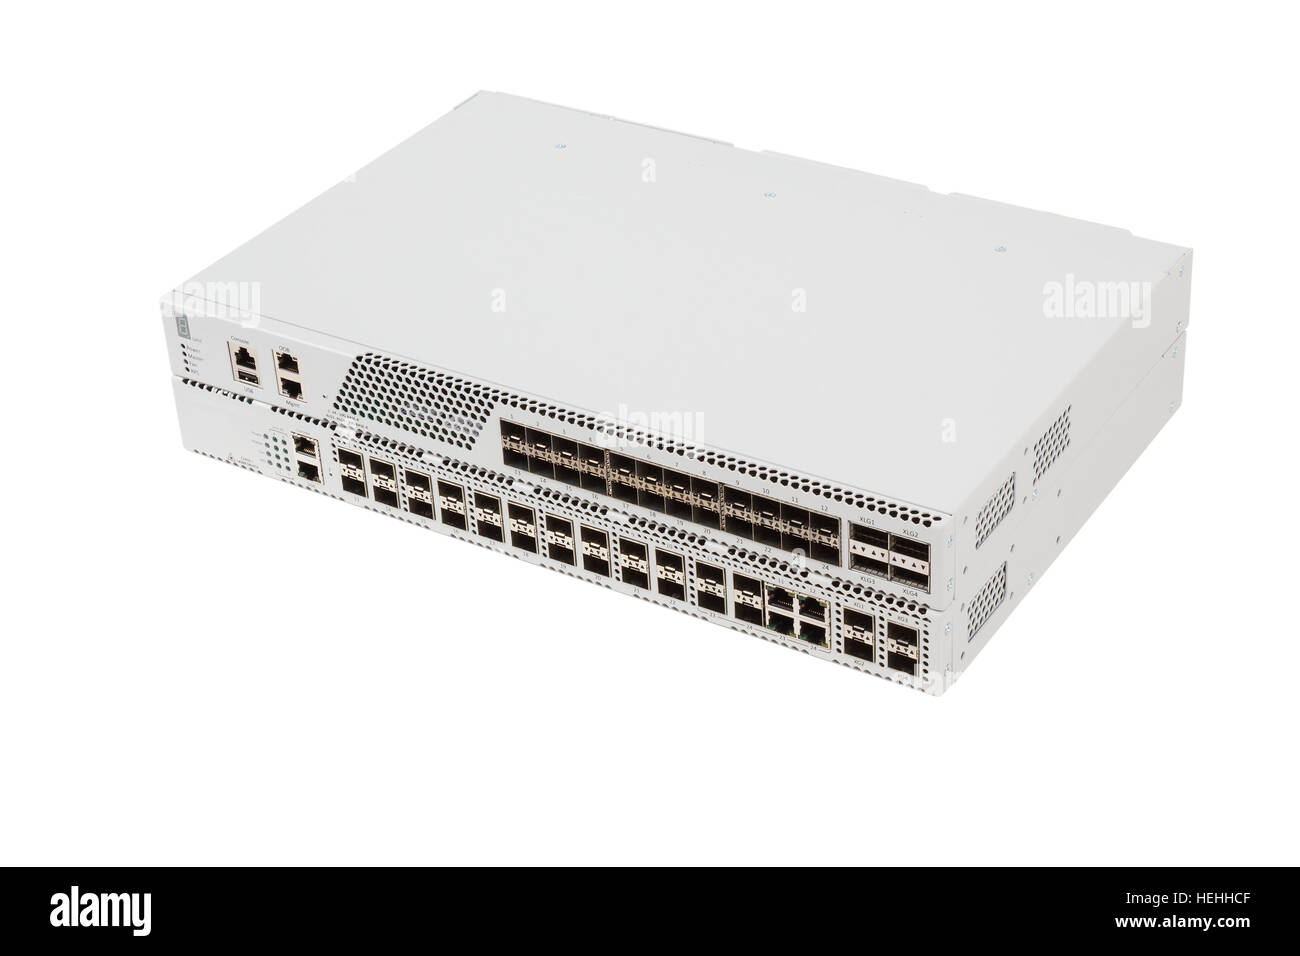 Fiber optic gigabit ethernet switch with SFP module slot and UTP category 5 connectors RJ-45 isolated on white background Stock Photo